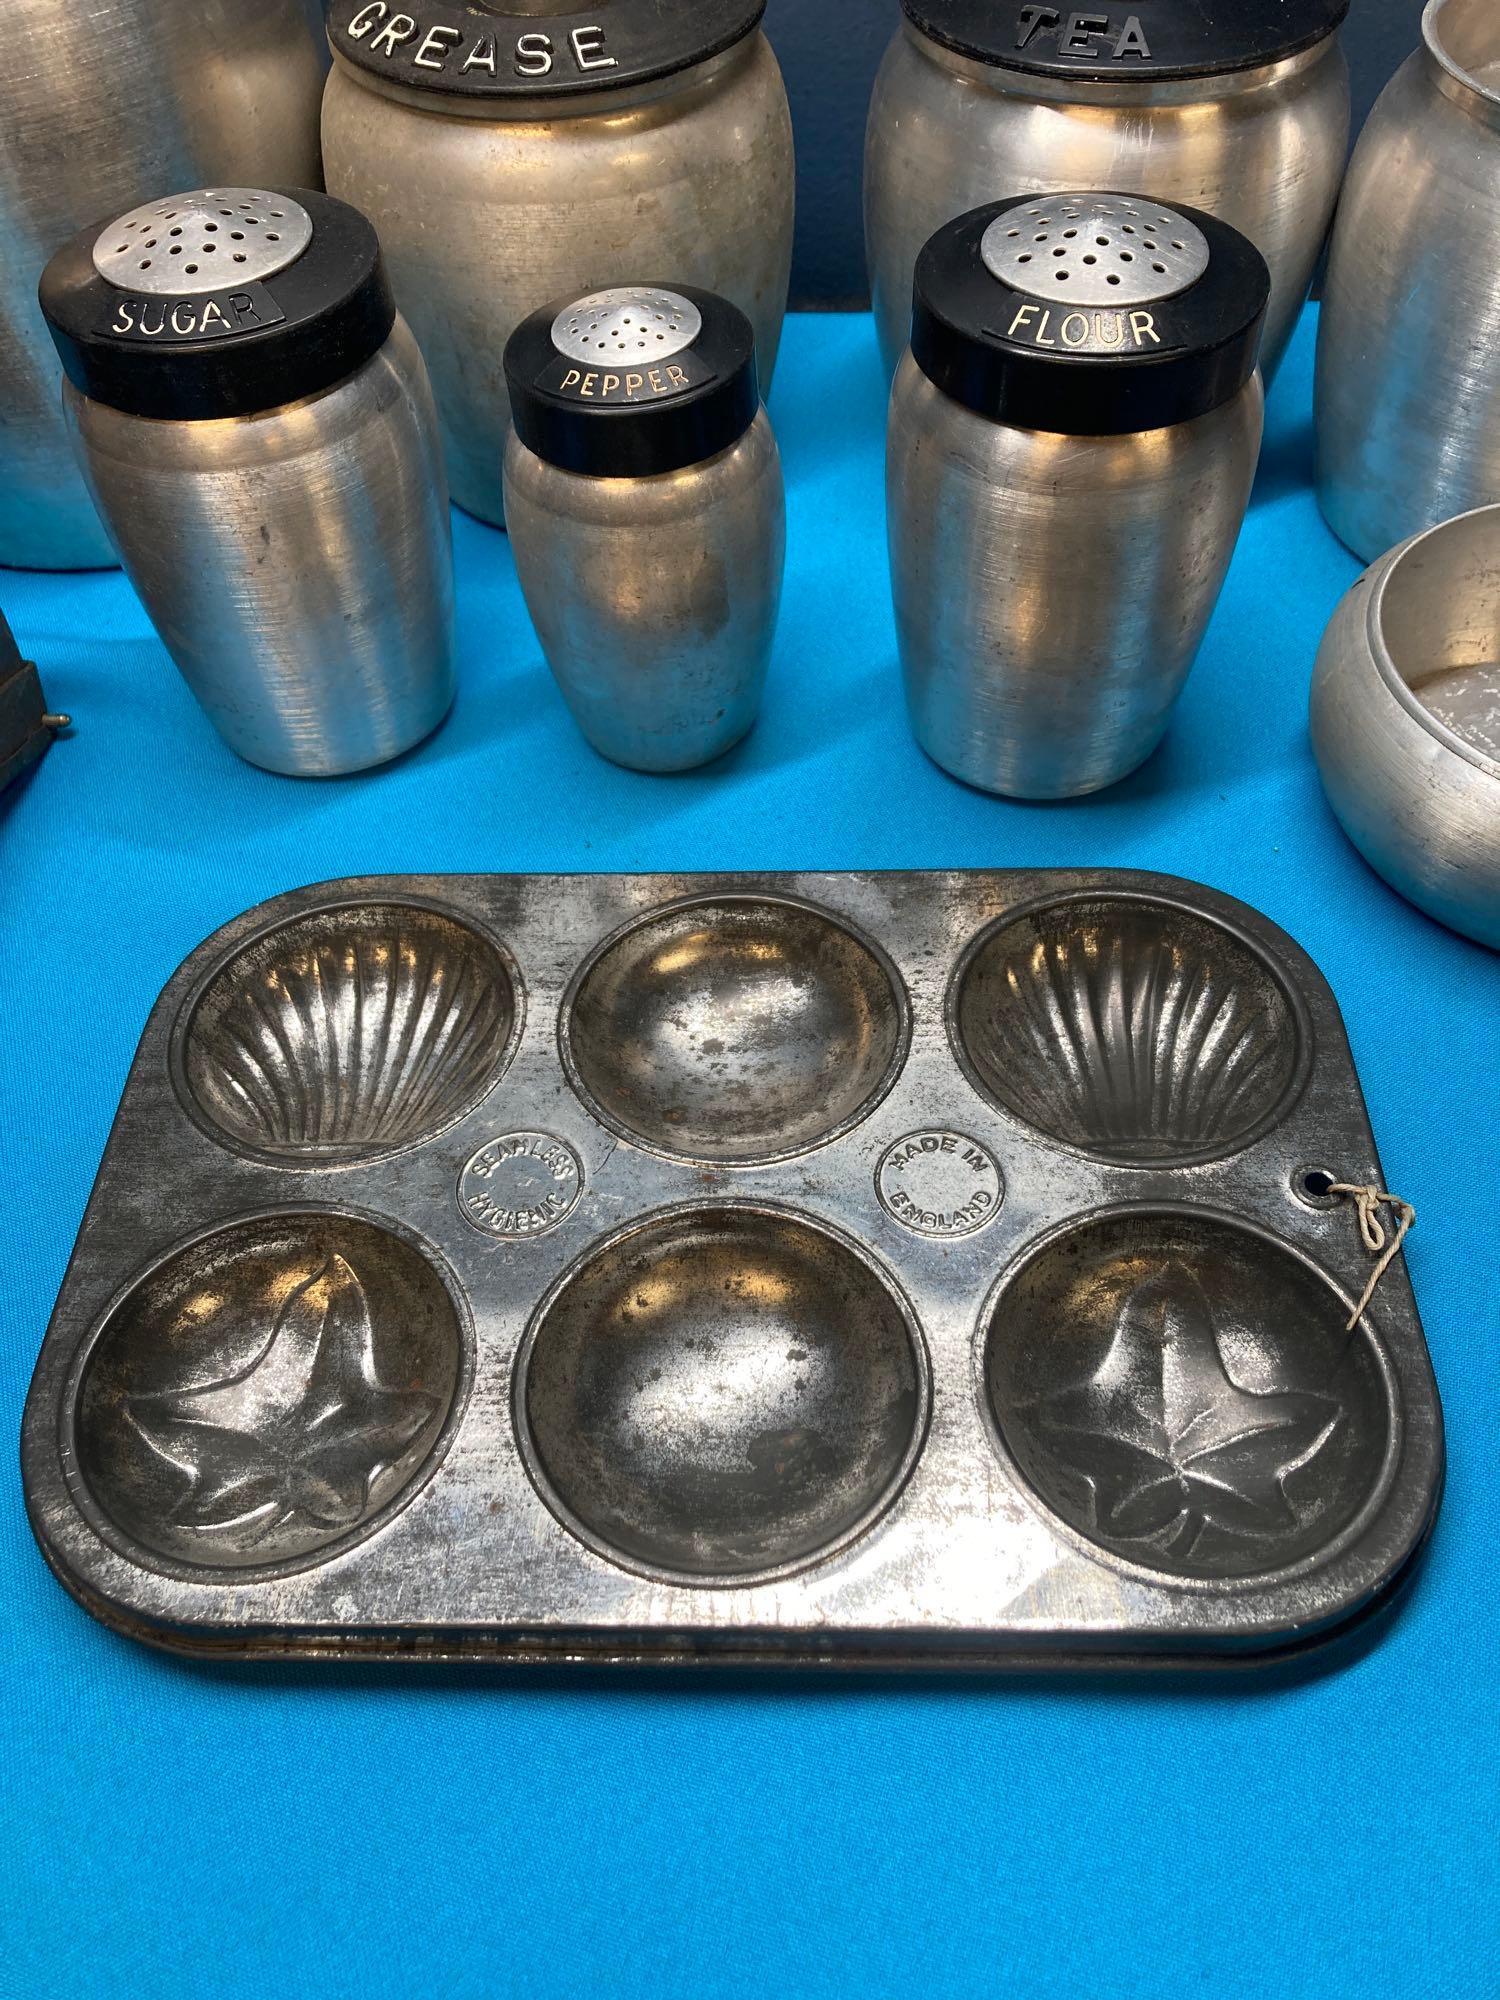 Aluminum canister set, muffin pan, copper box and masher